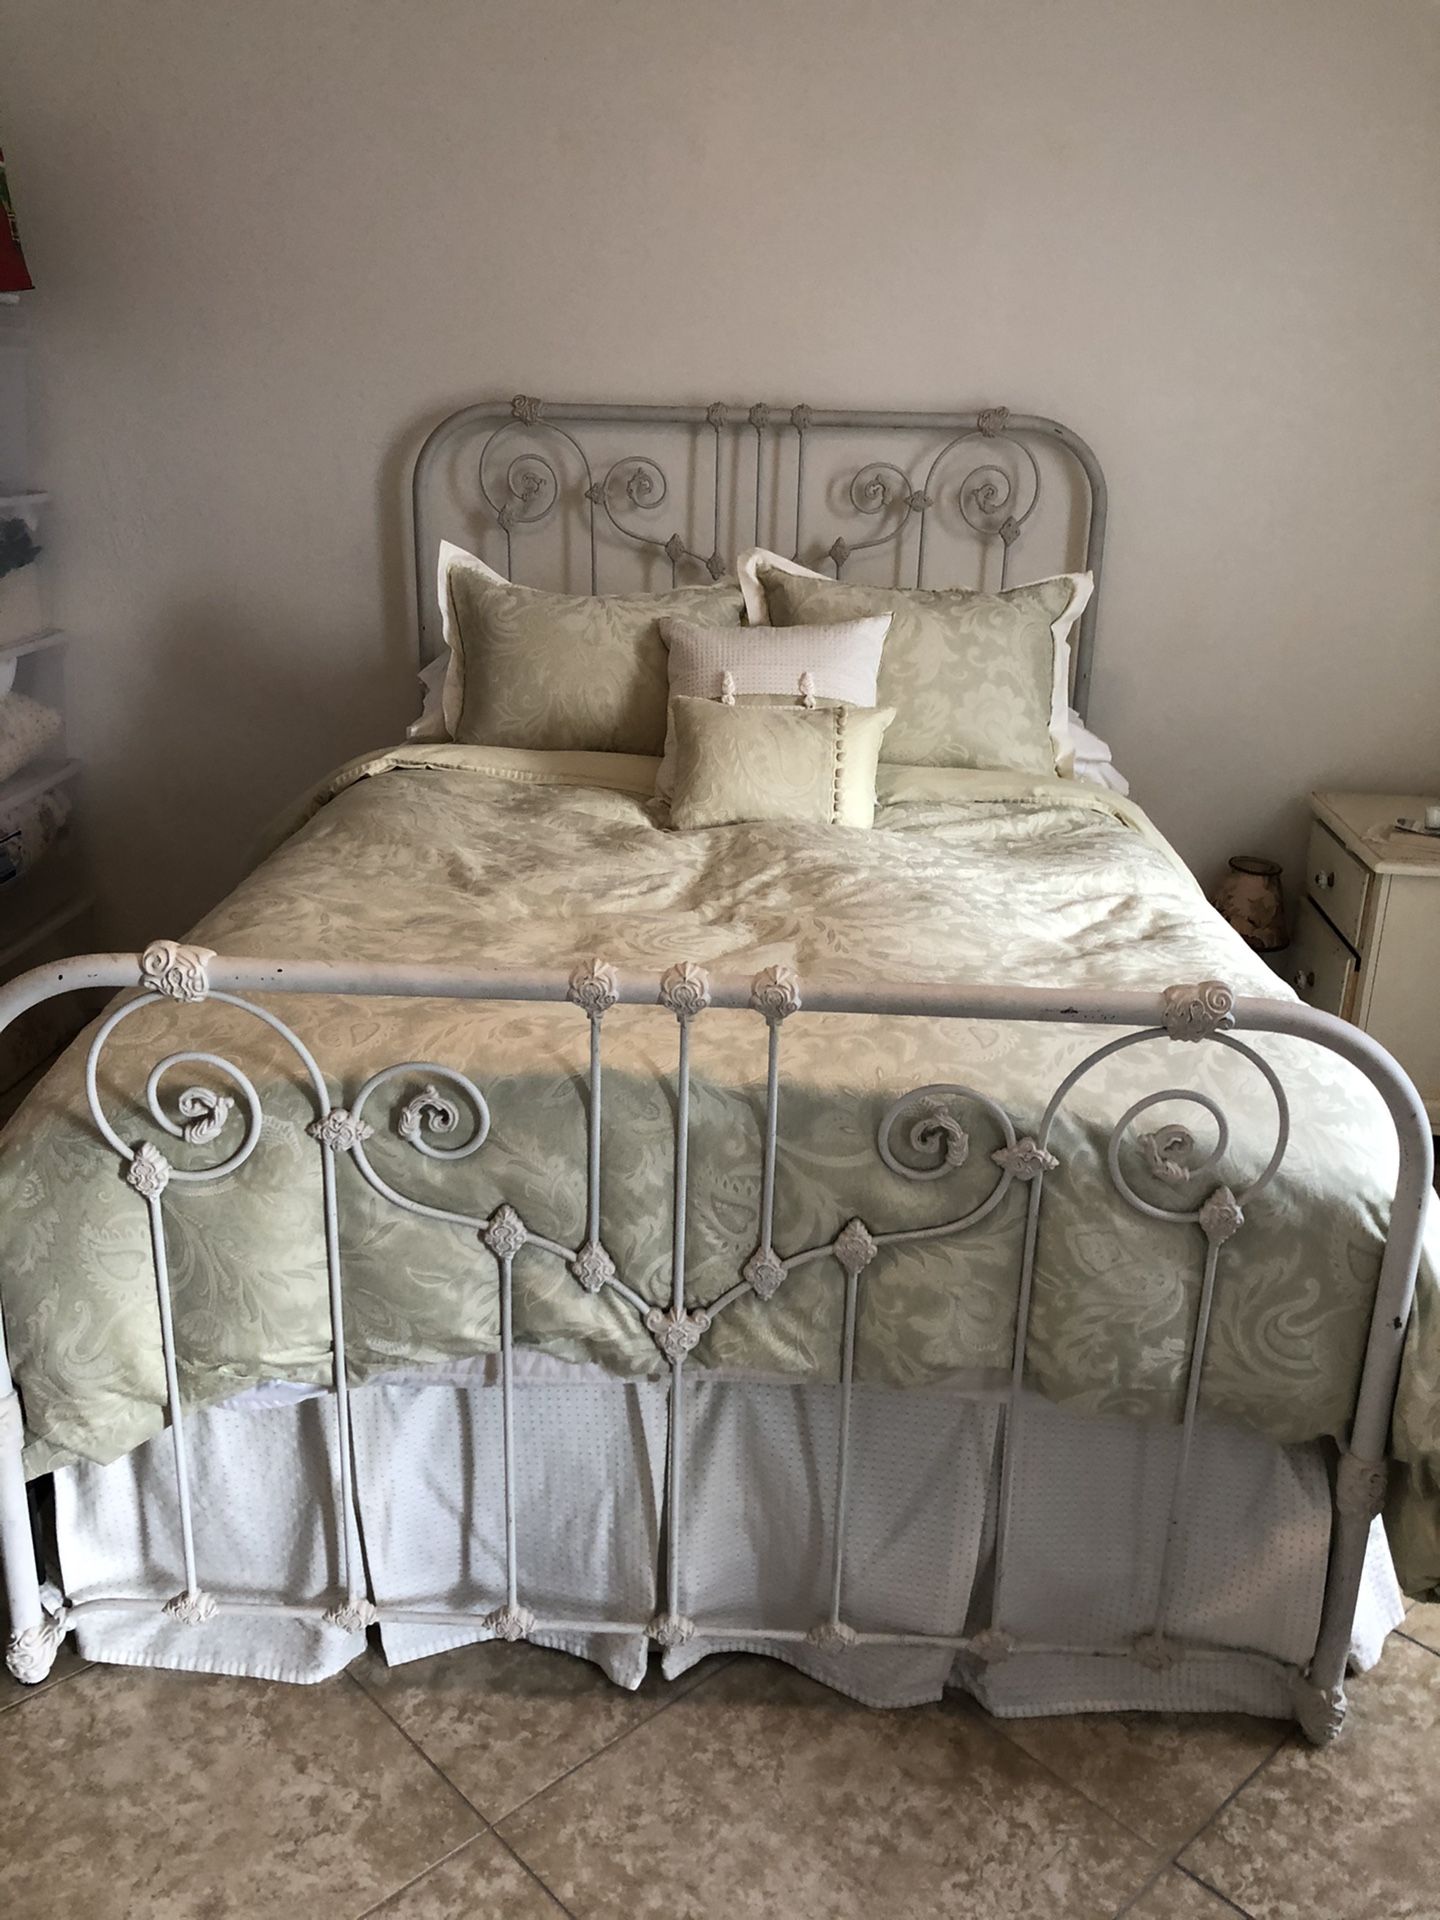 Wrought Iron Queen size Bed Frame including Mattress and box spring.